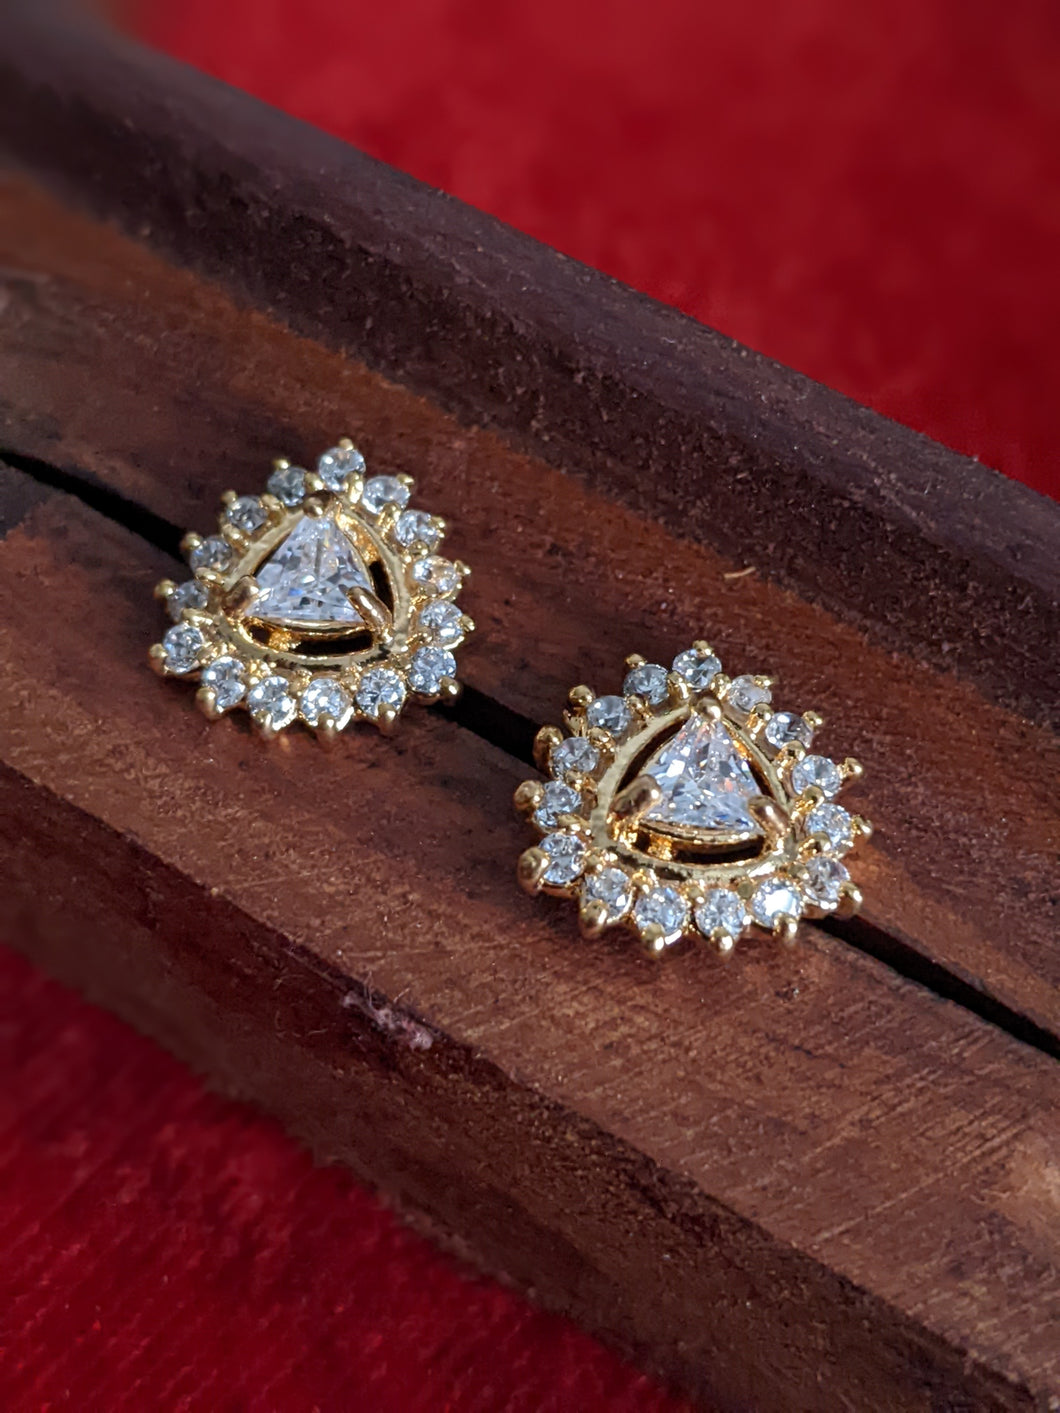 Small stud earrings for a classy look. Wear it with ethnic or modern clothes